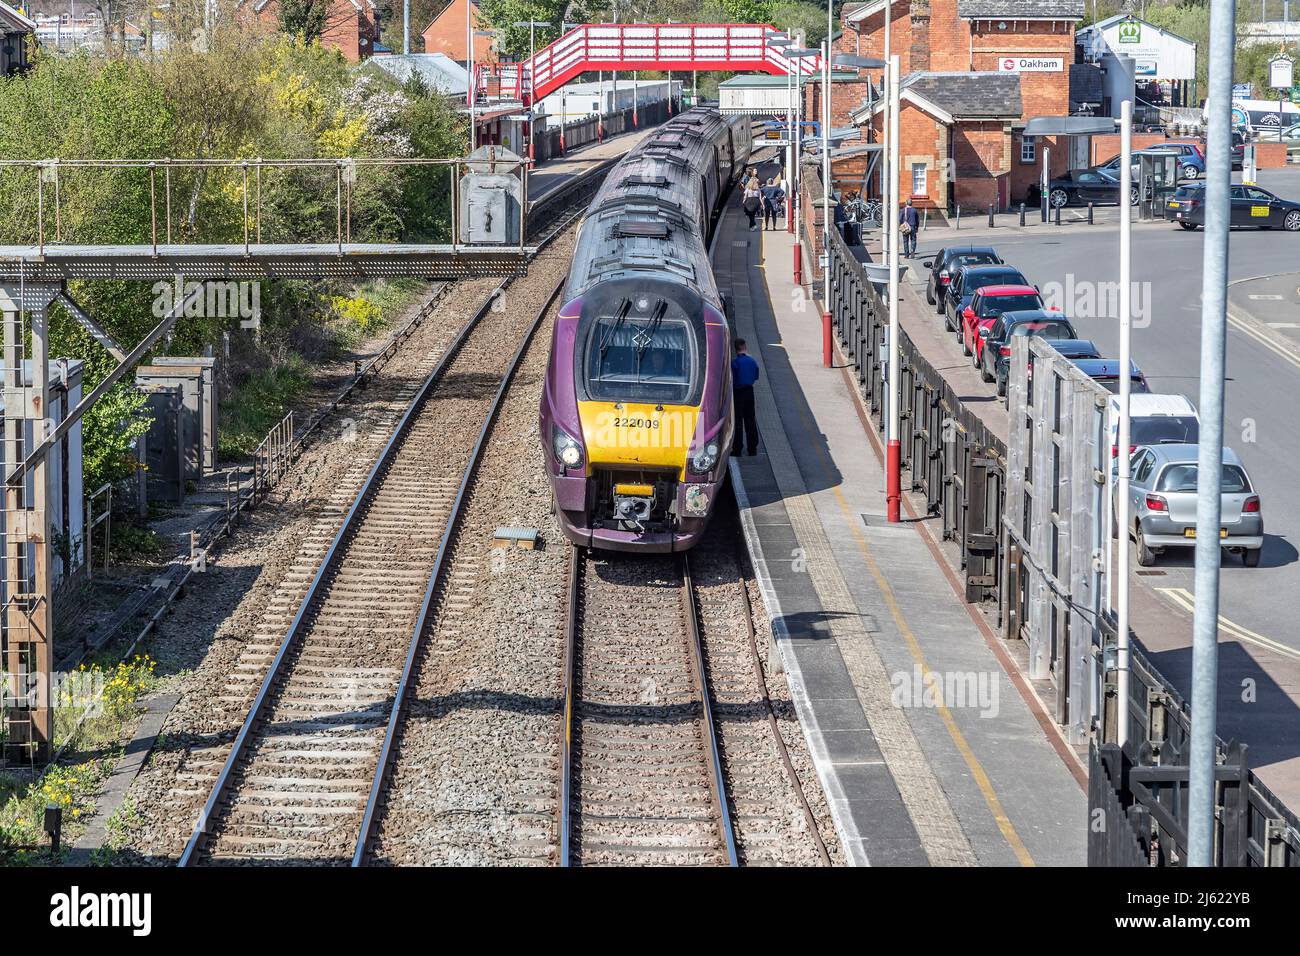 Diesel-electric passenger train leaving Oakham station, looking down from the foot bridge over then tracks, Rutland, Leicester, England, UK. Stock Photo